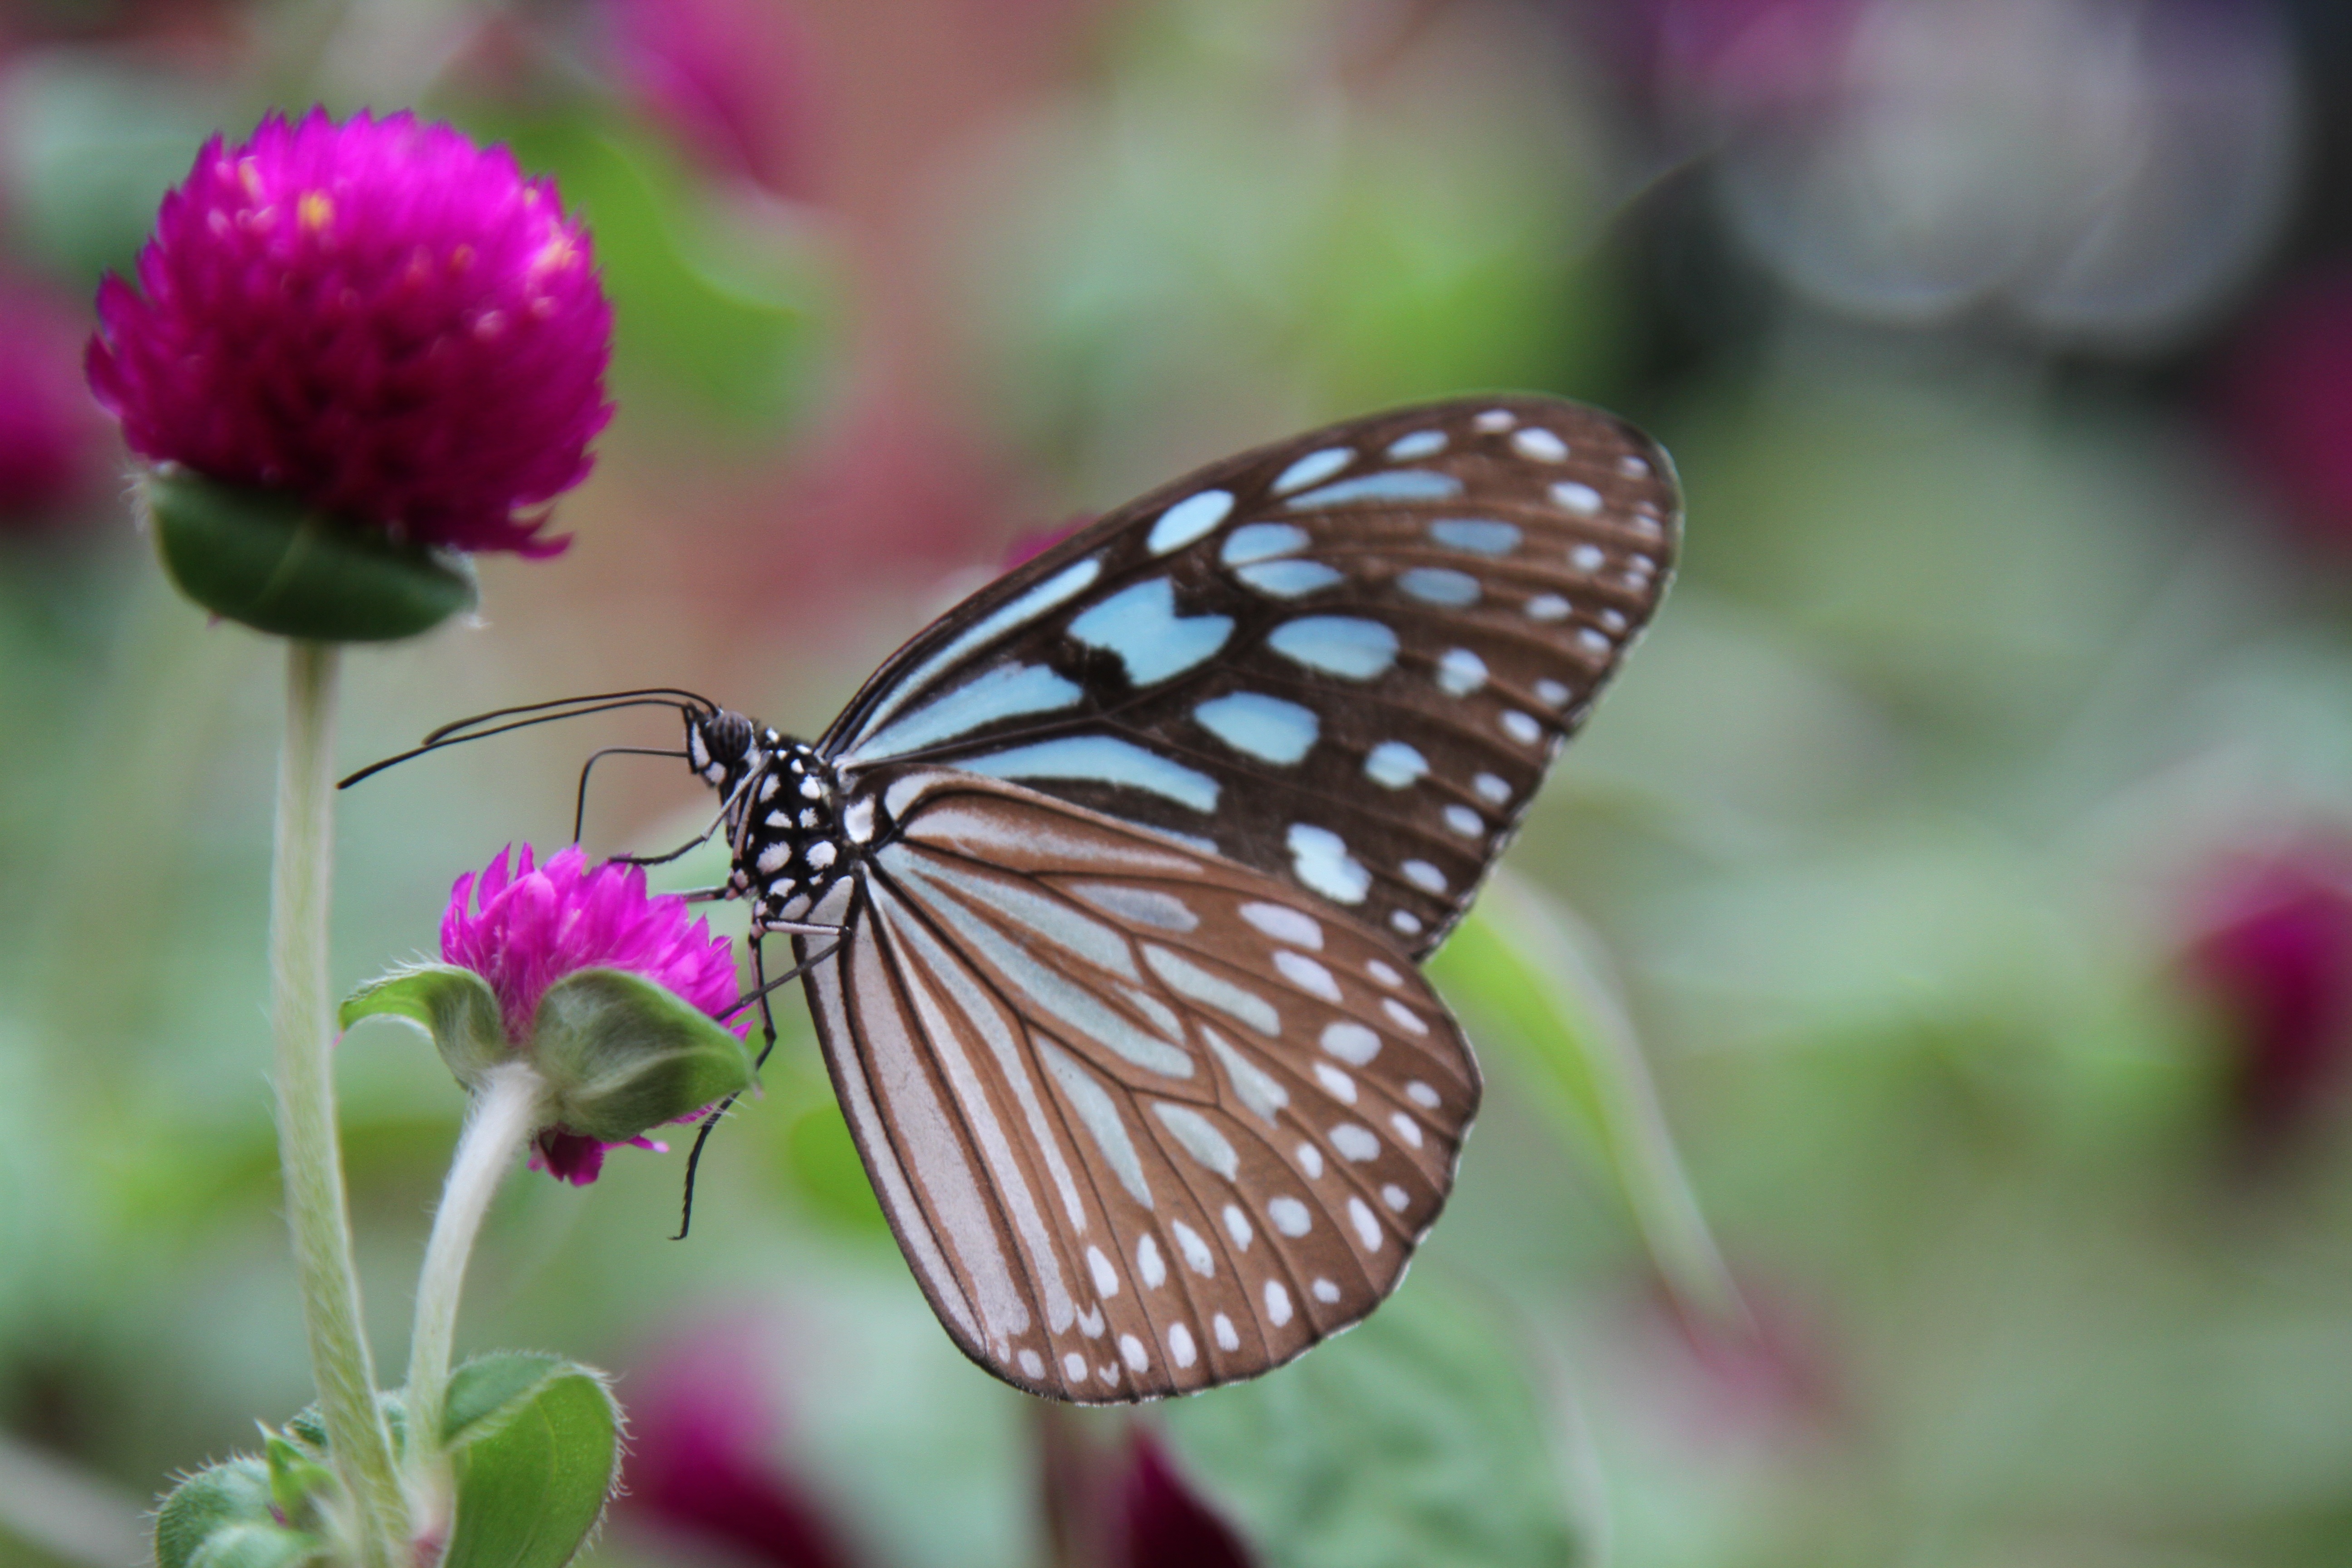 156650 download wallpaper flower, macro, butterfly, wings, clover screensavers and pictures for free